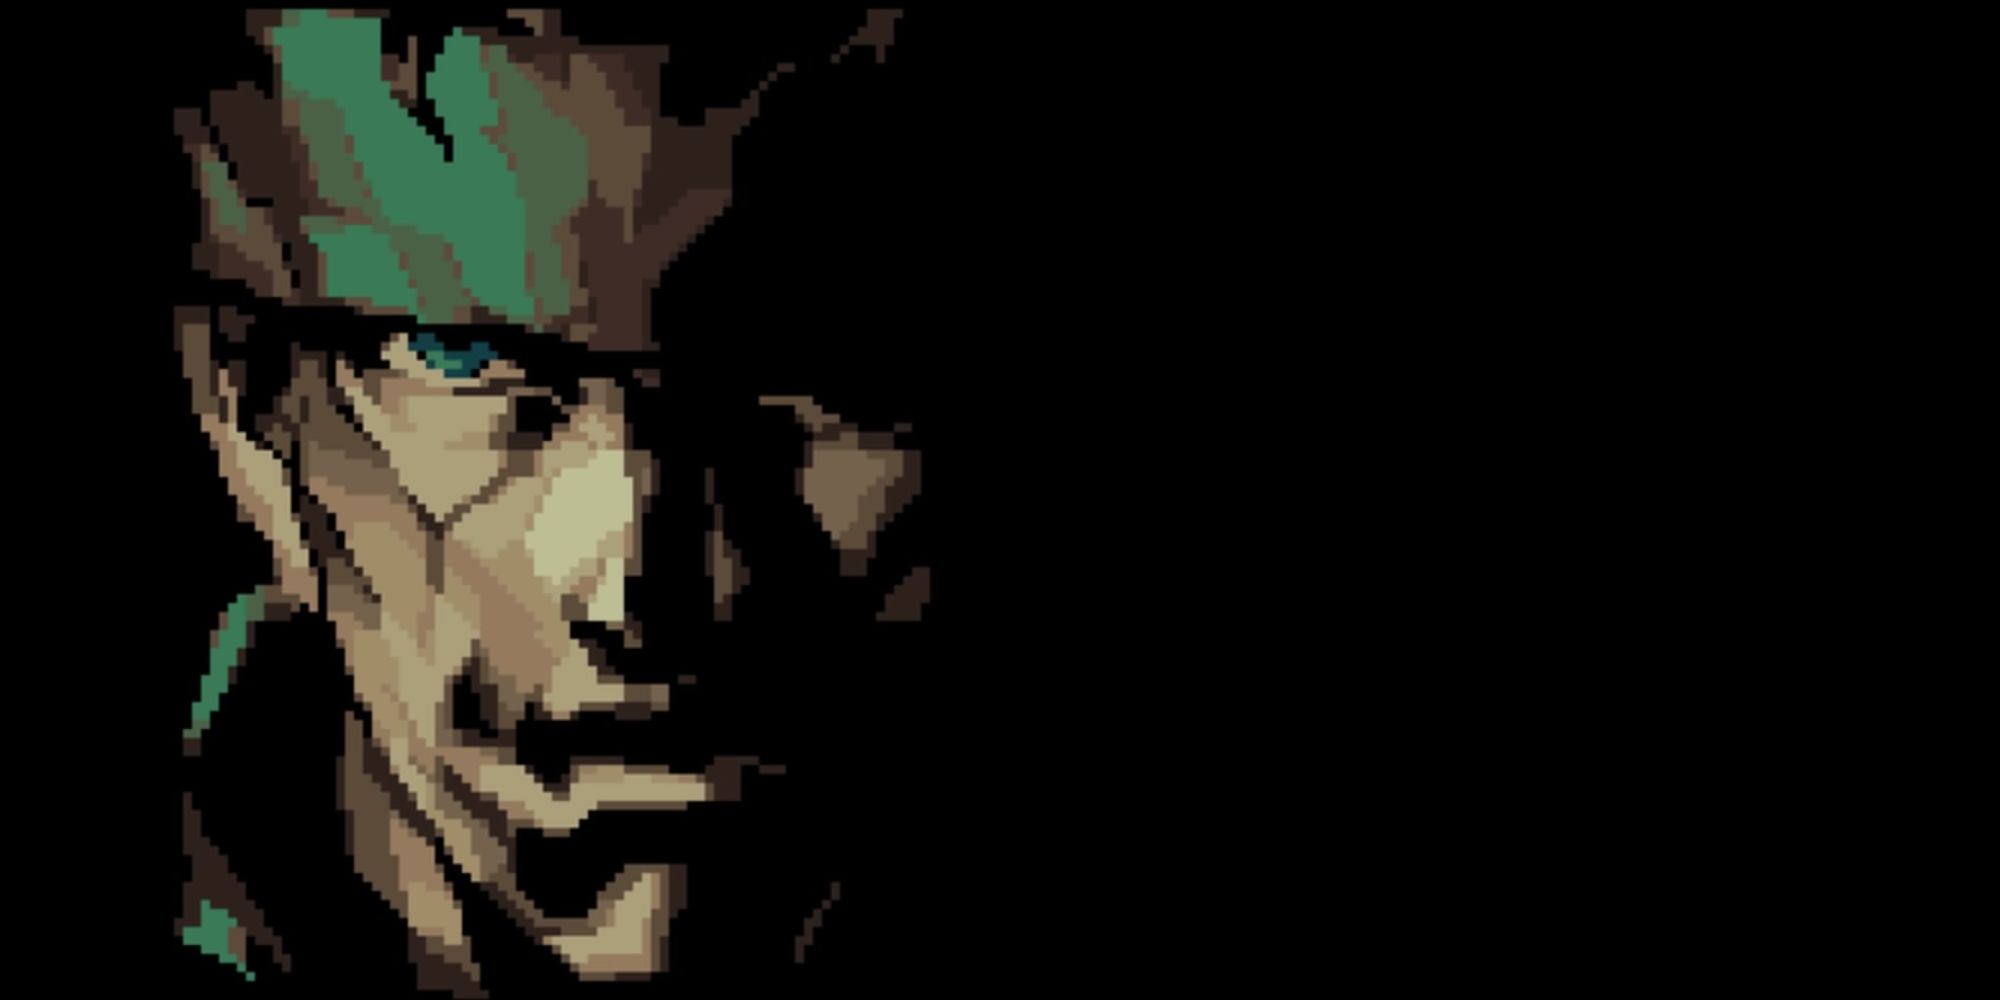 Image from the intro of Metal Gear 2 Solid Snake shows a half shadowed closeup of Solid Snake's face from the NES game.